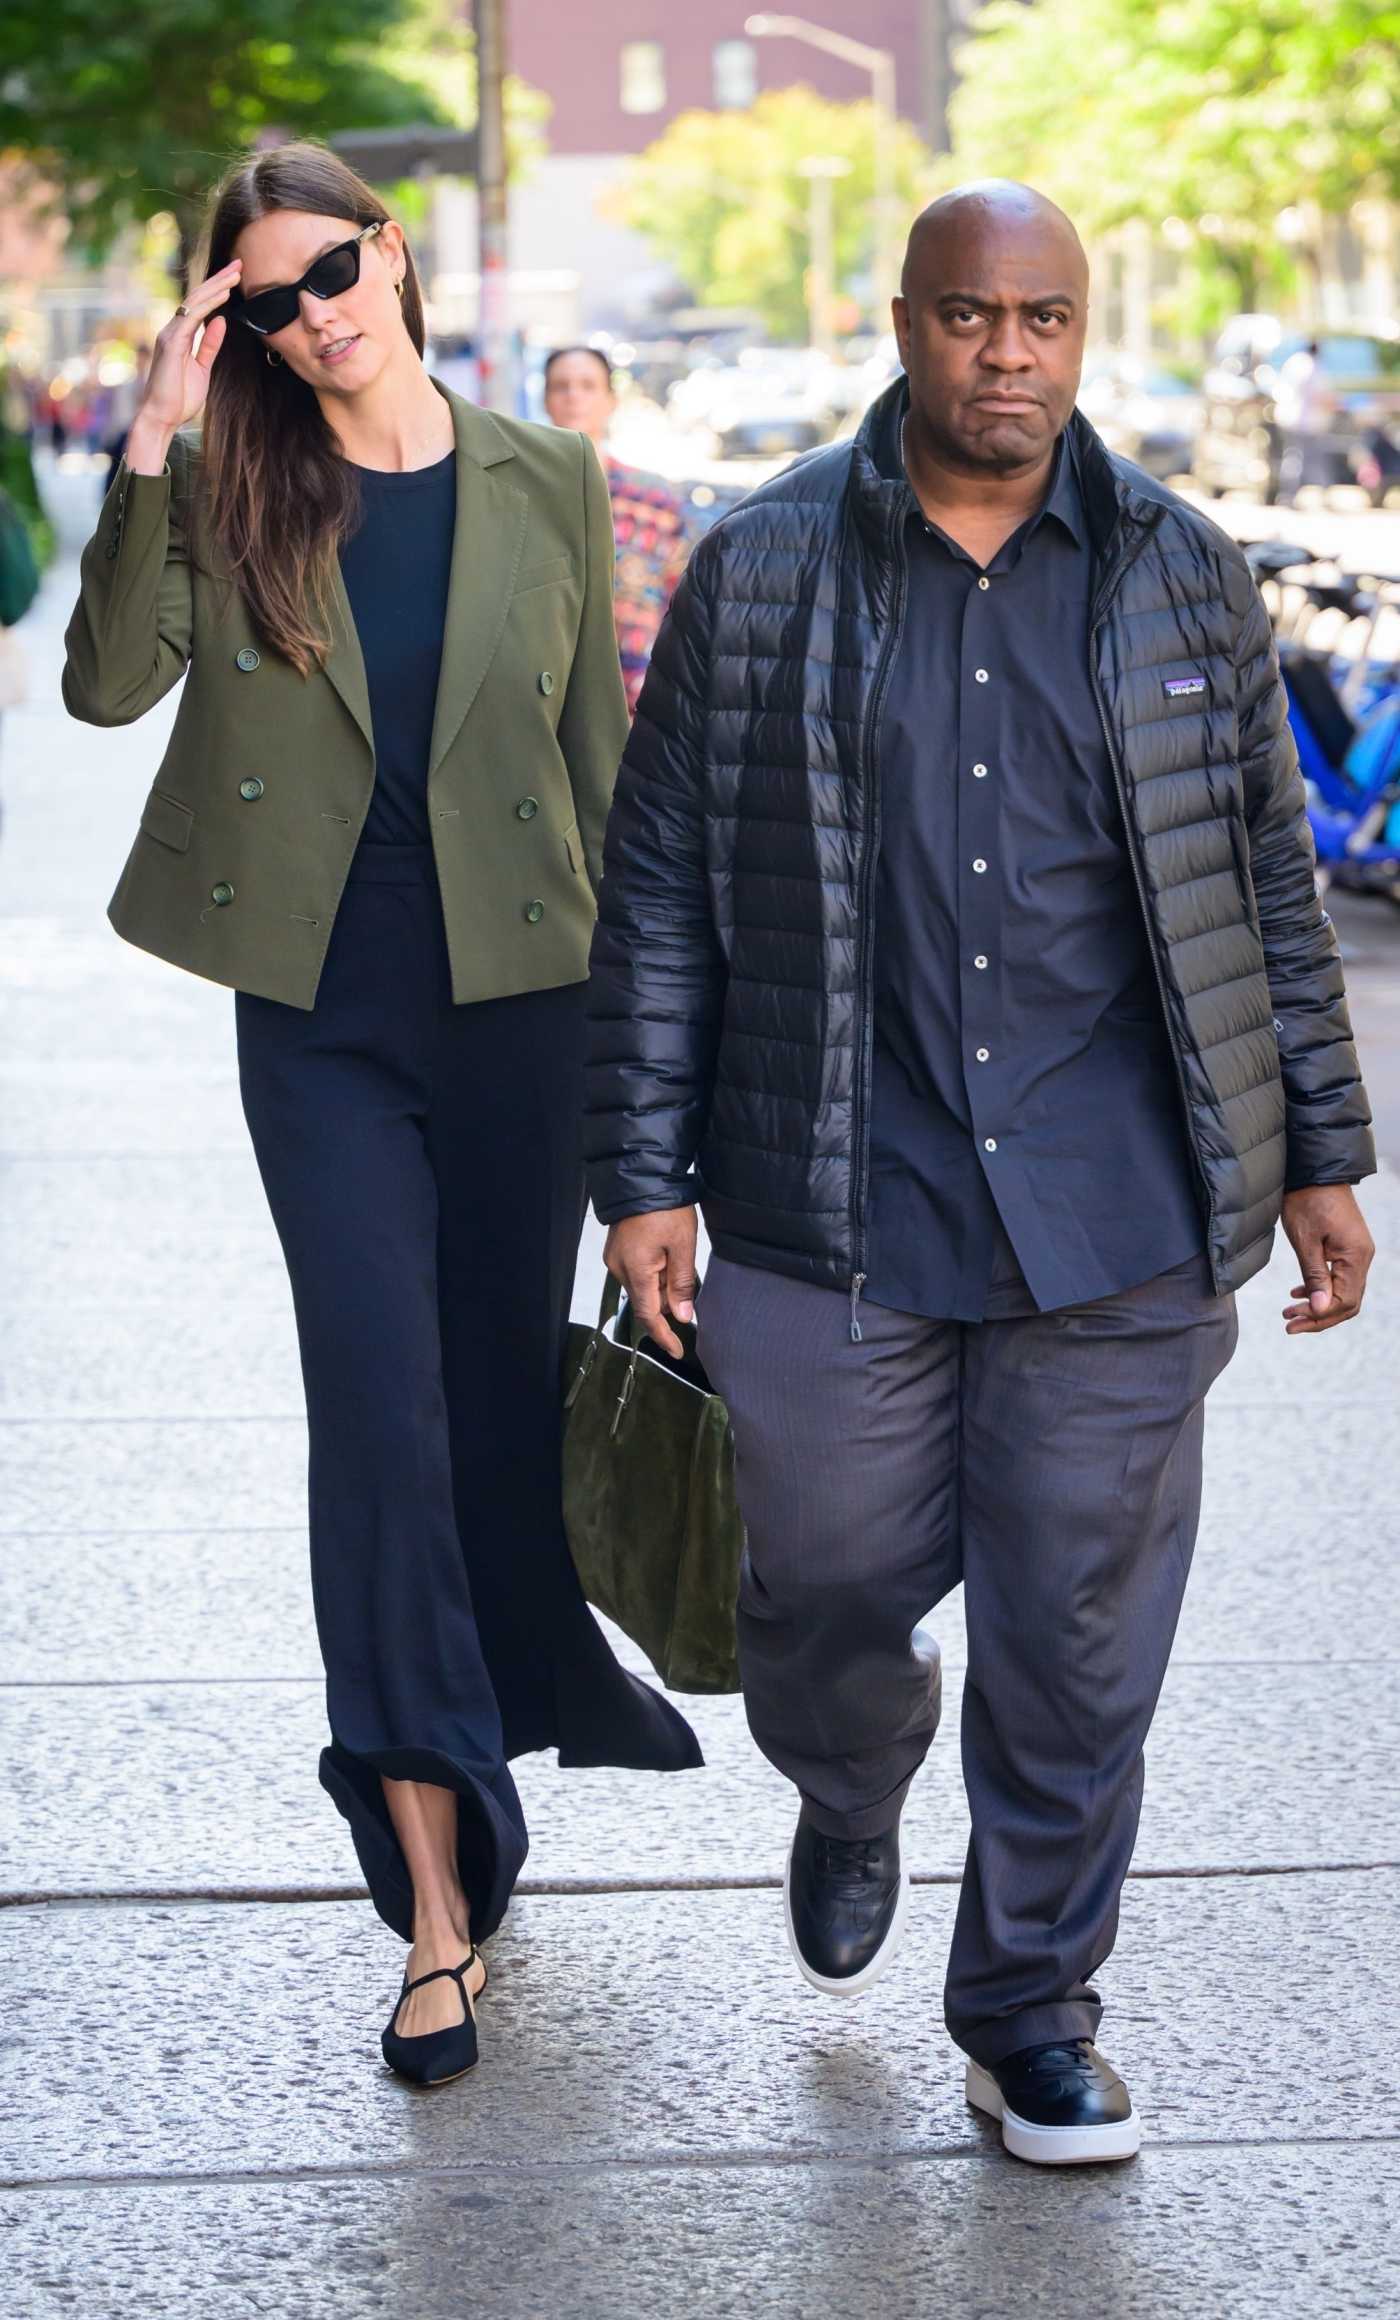 Karlie Kloss in an Olive Blazer Was Seen During a Street Stroll with Her Bodyguard in New York 10/10/2023